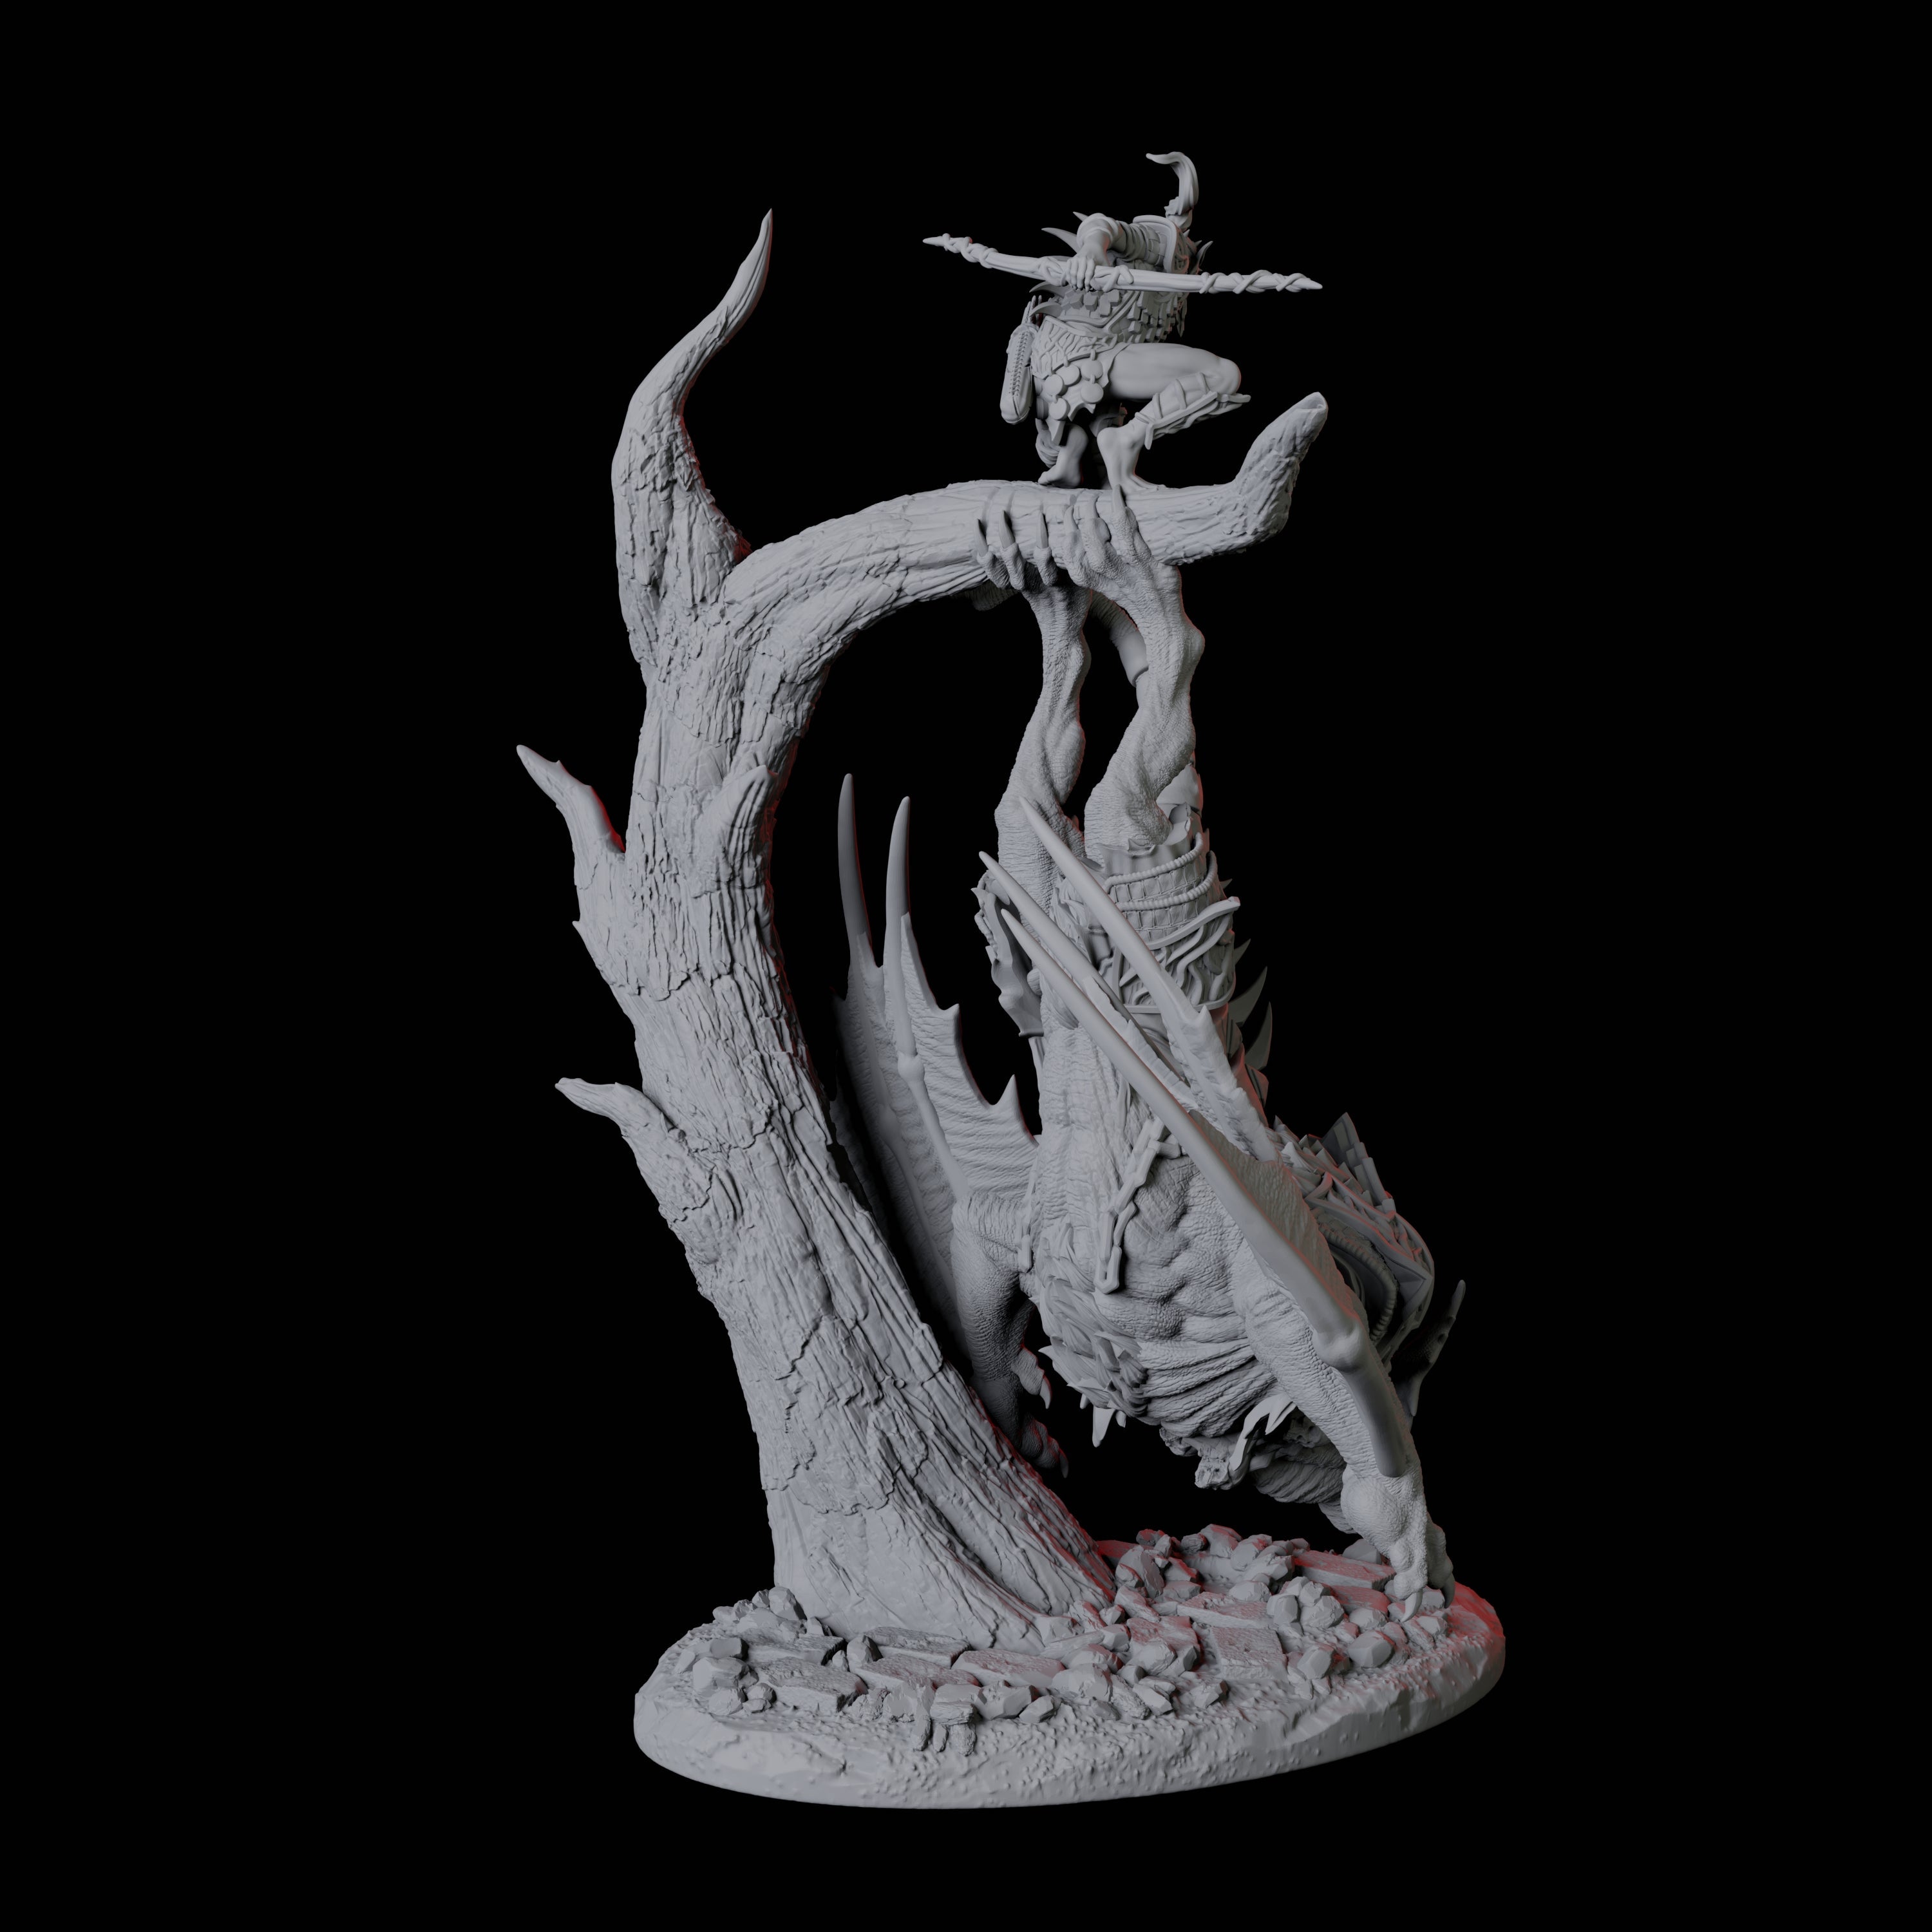 Swooping Vampire Spawn on Giant Bat D Miniature for Dungeons and Dragons, Pathfinder or other TTRPGs